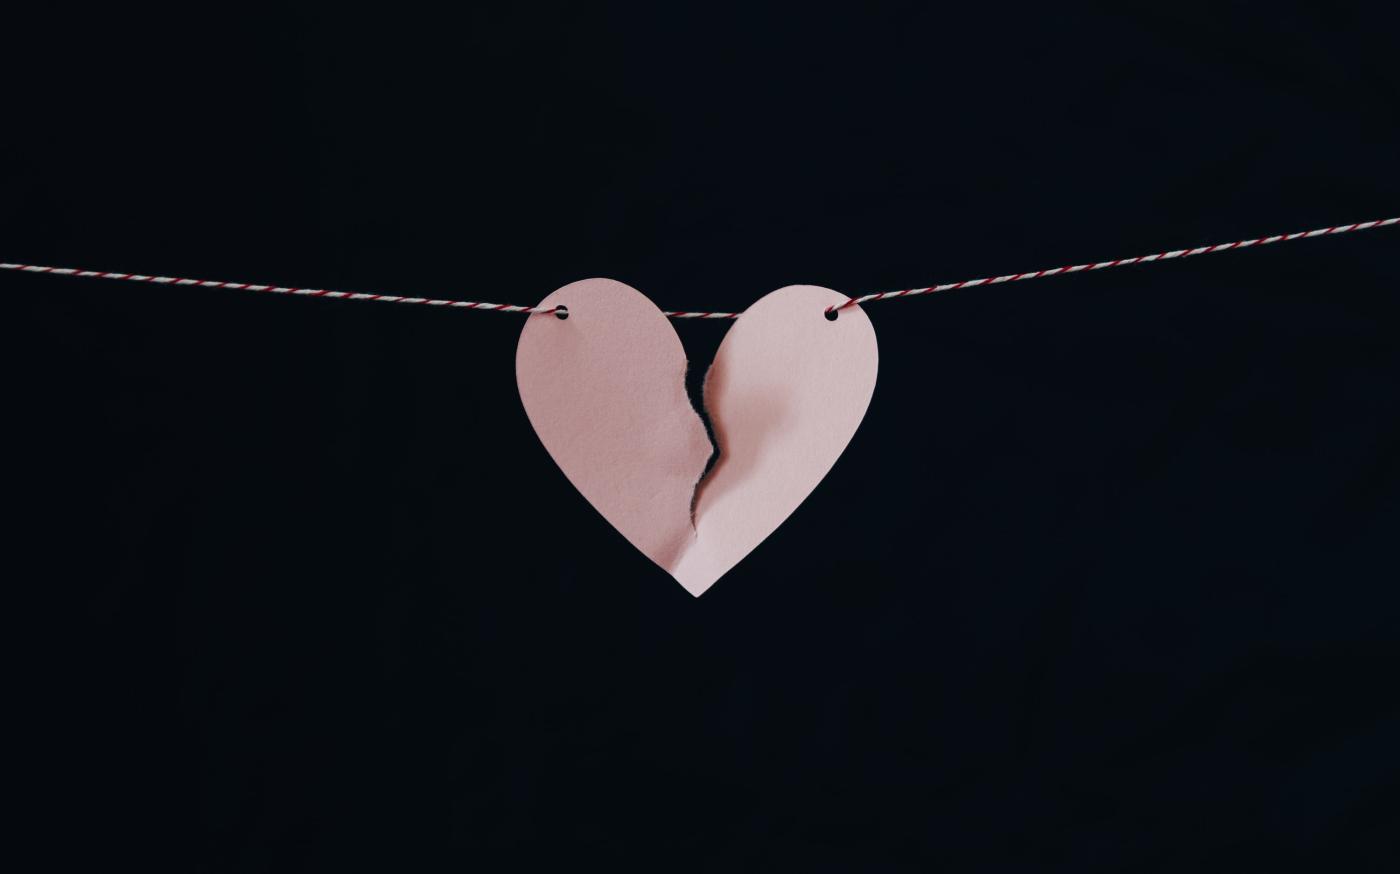 broken heart hanging on wire by Kelly Sikkema courtesy of Unsplash.